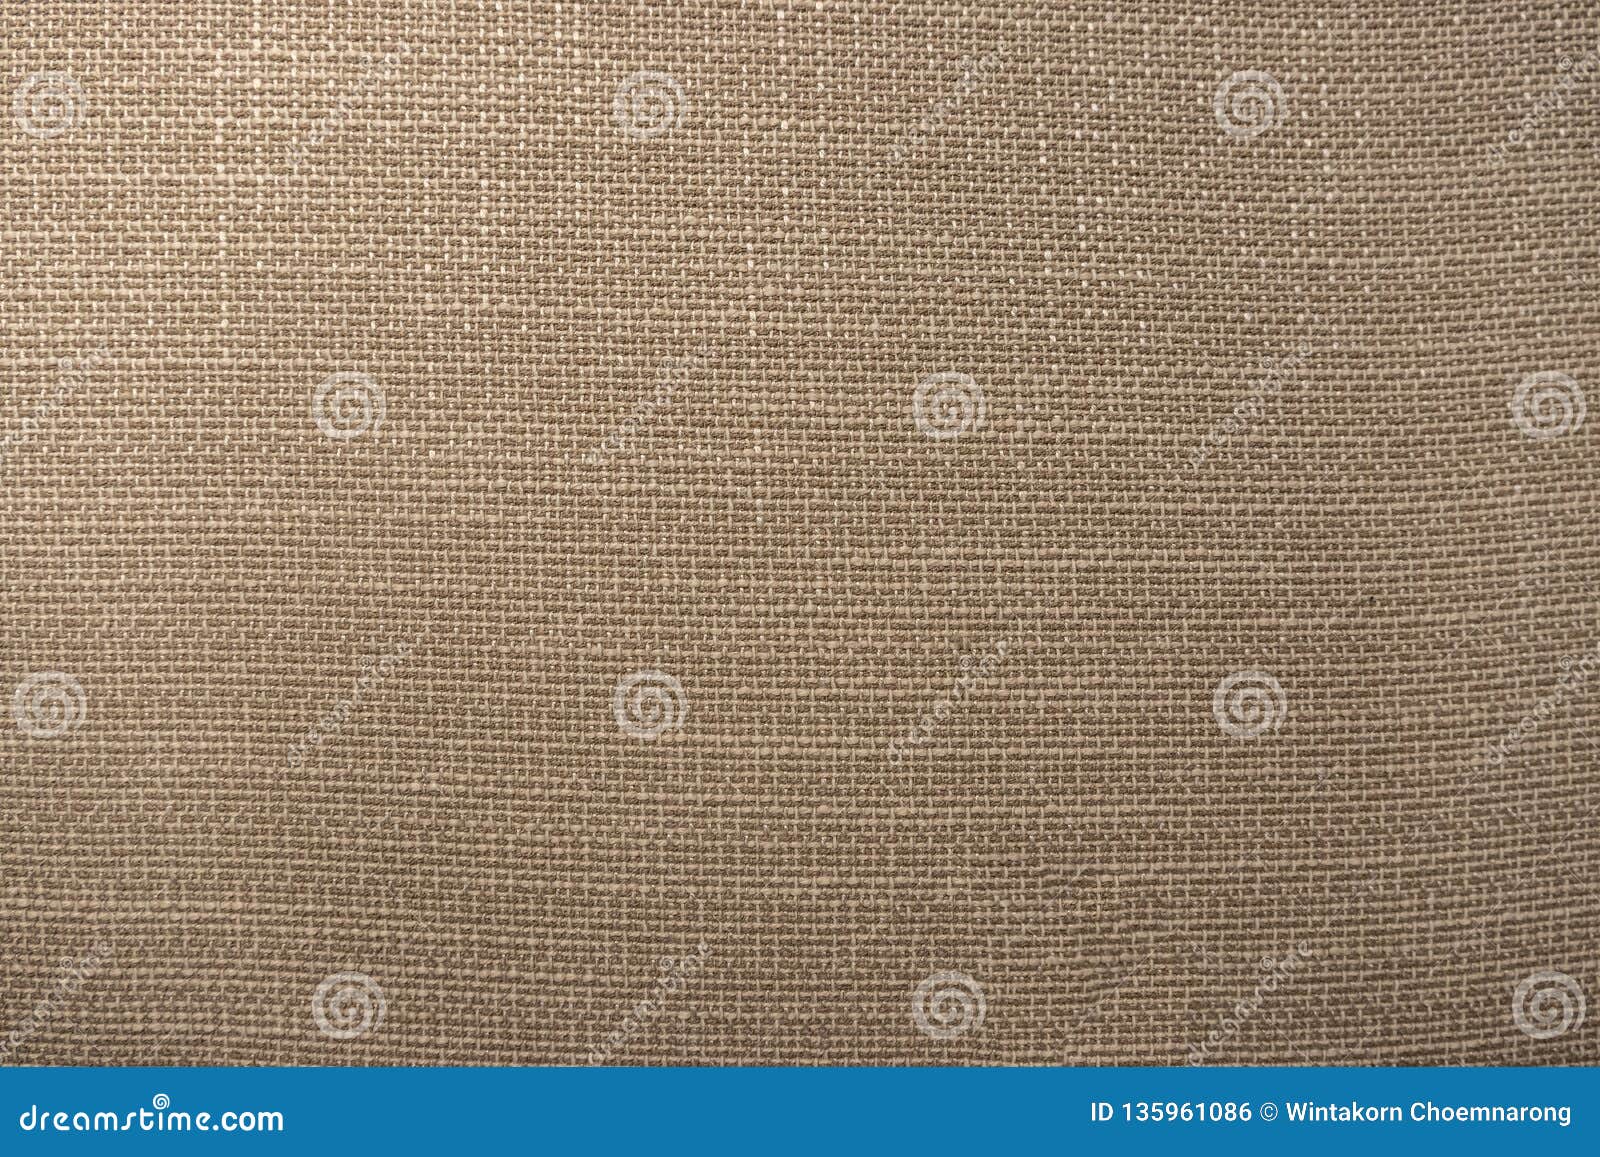 very fine woven fabric texture background